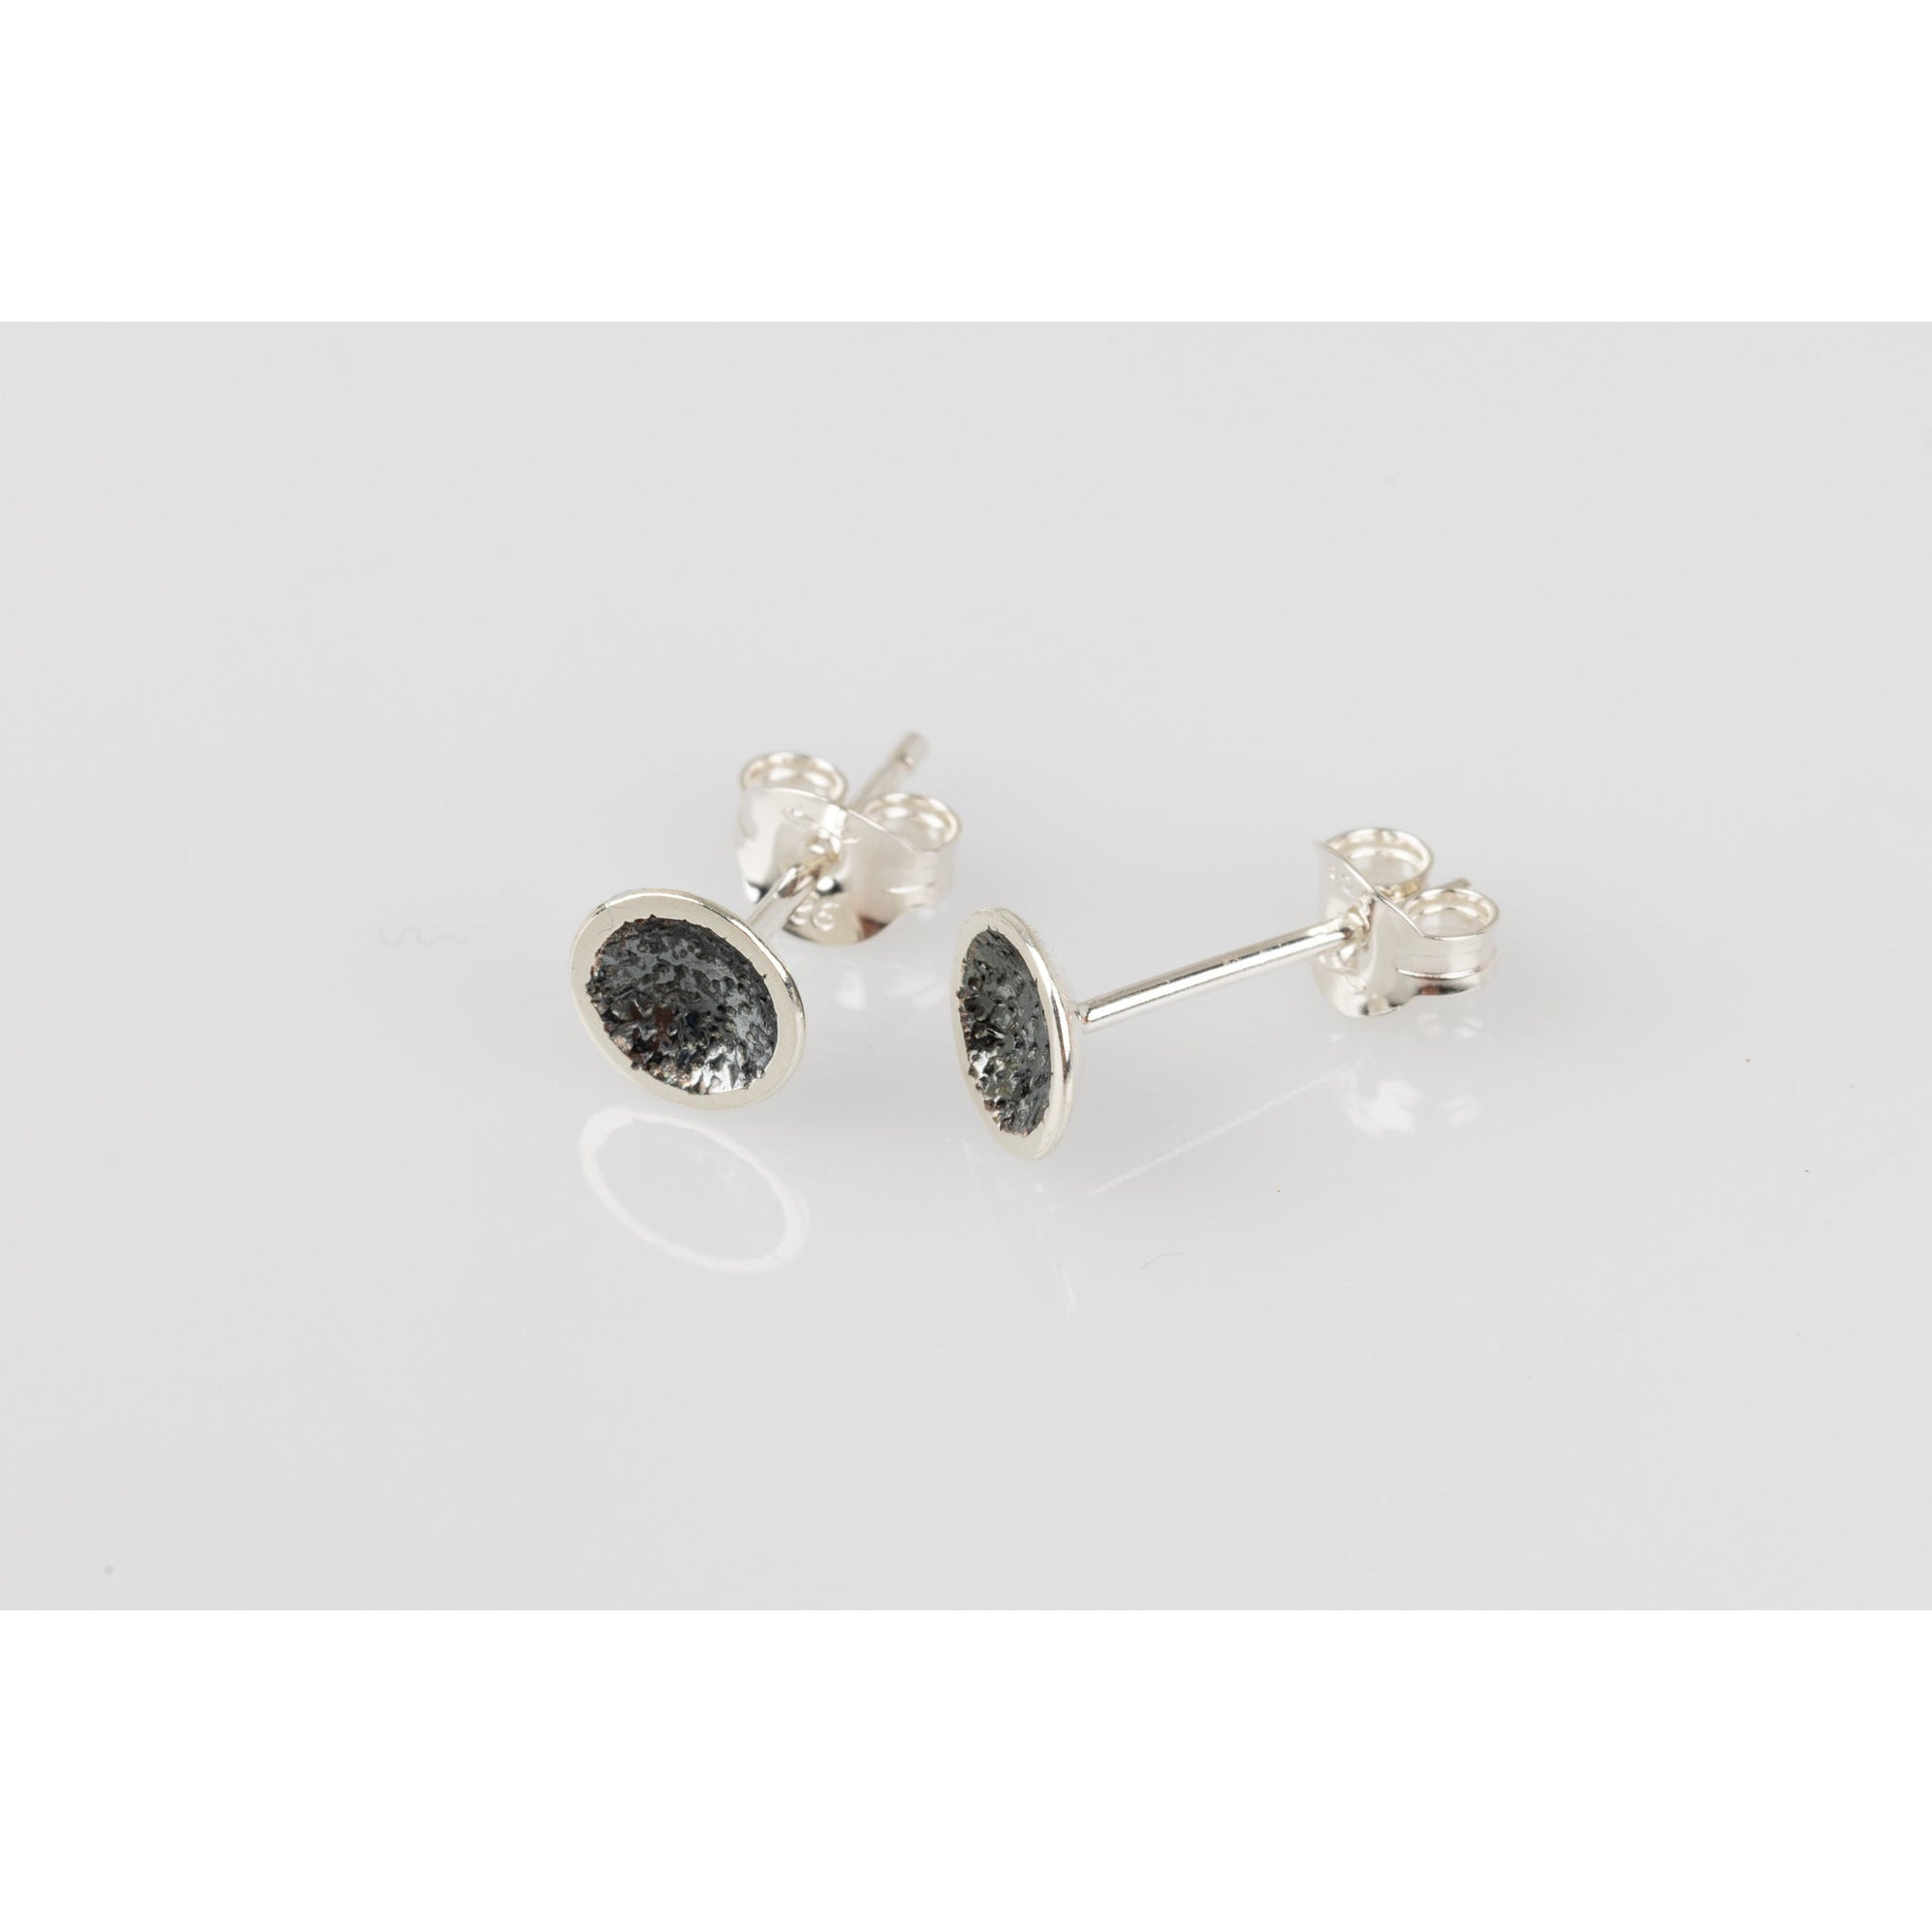 'SA Ea49 Domed oxidised textured studs' by Sandra Austin jewellery, available at Padstow Gallery, Cornwall